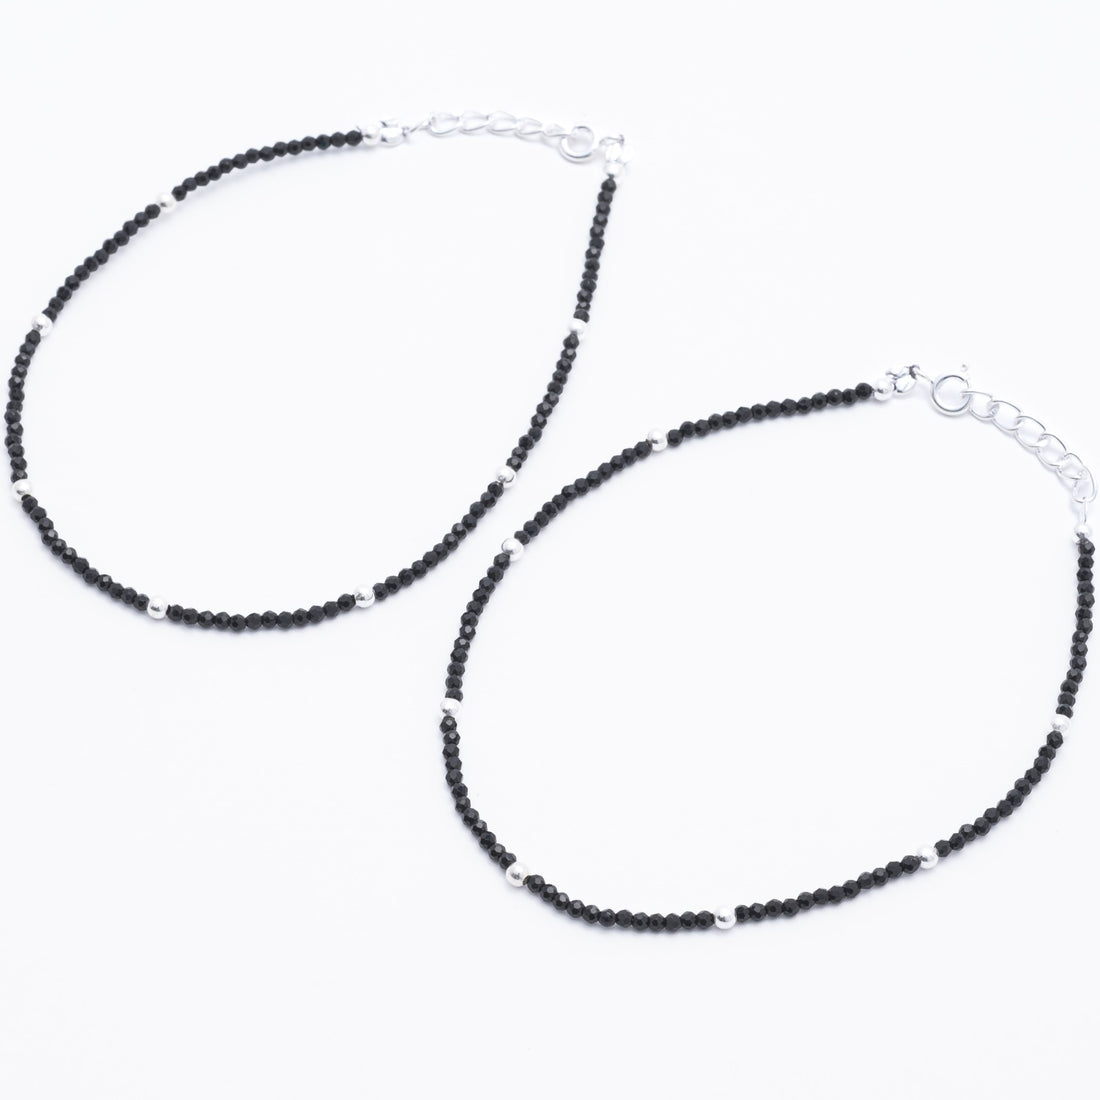 Silver and Black Beads Anklets for Women